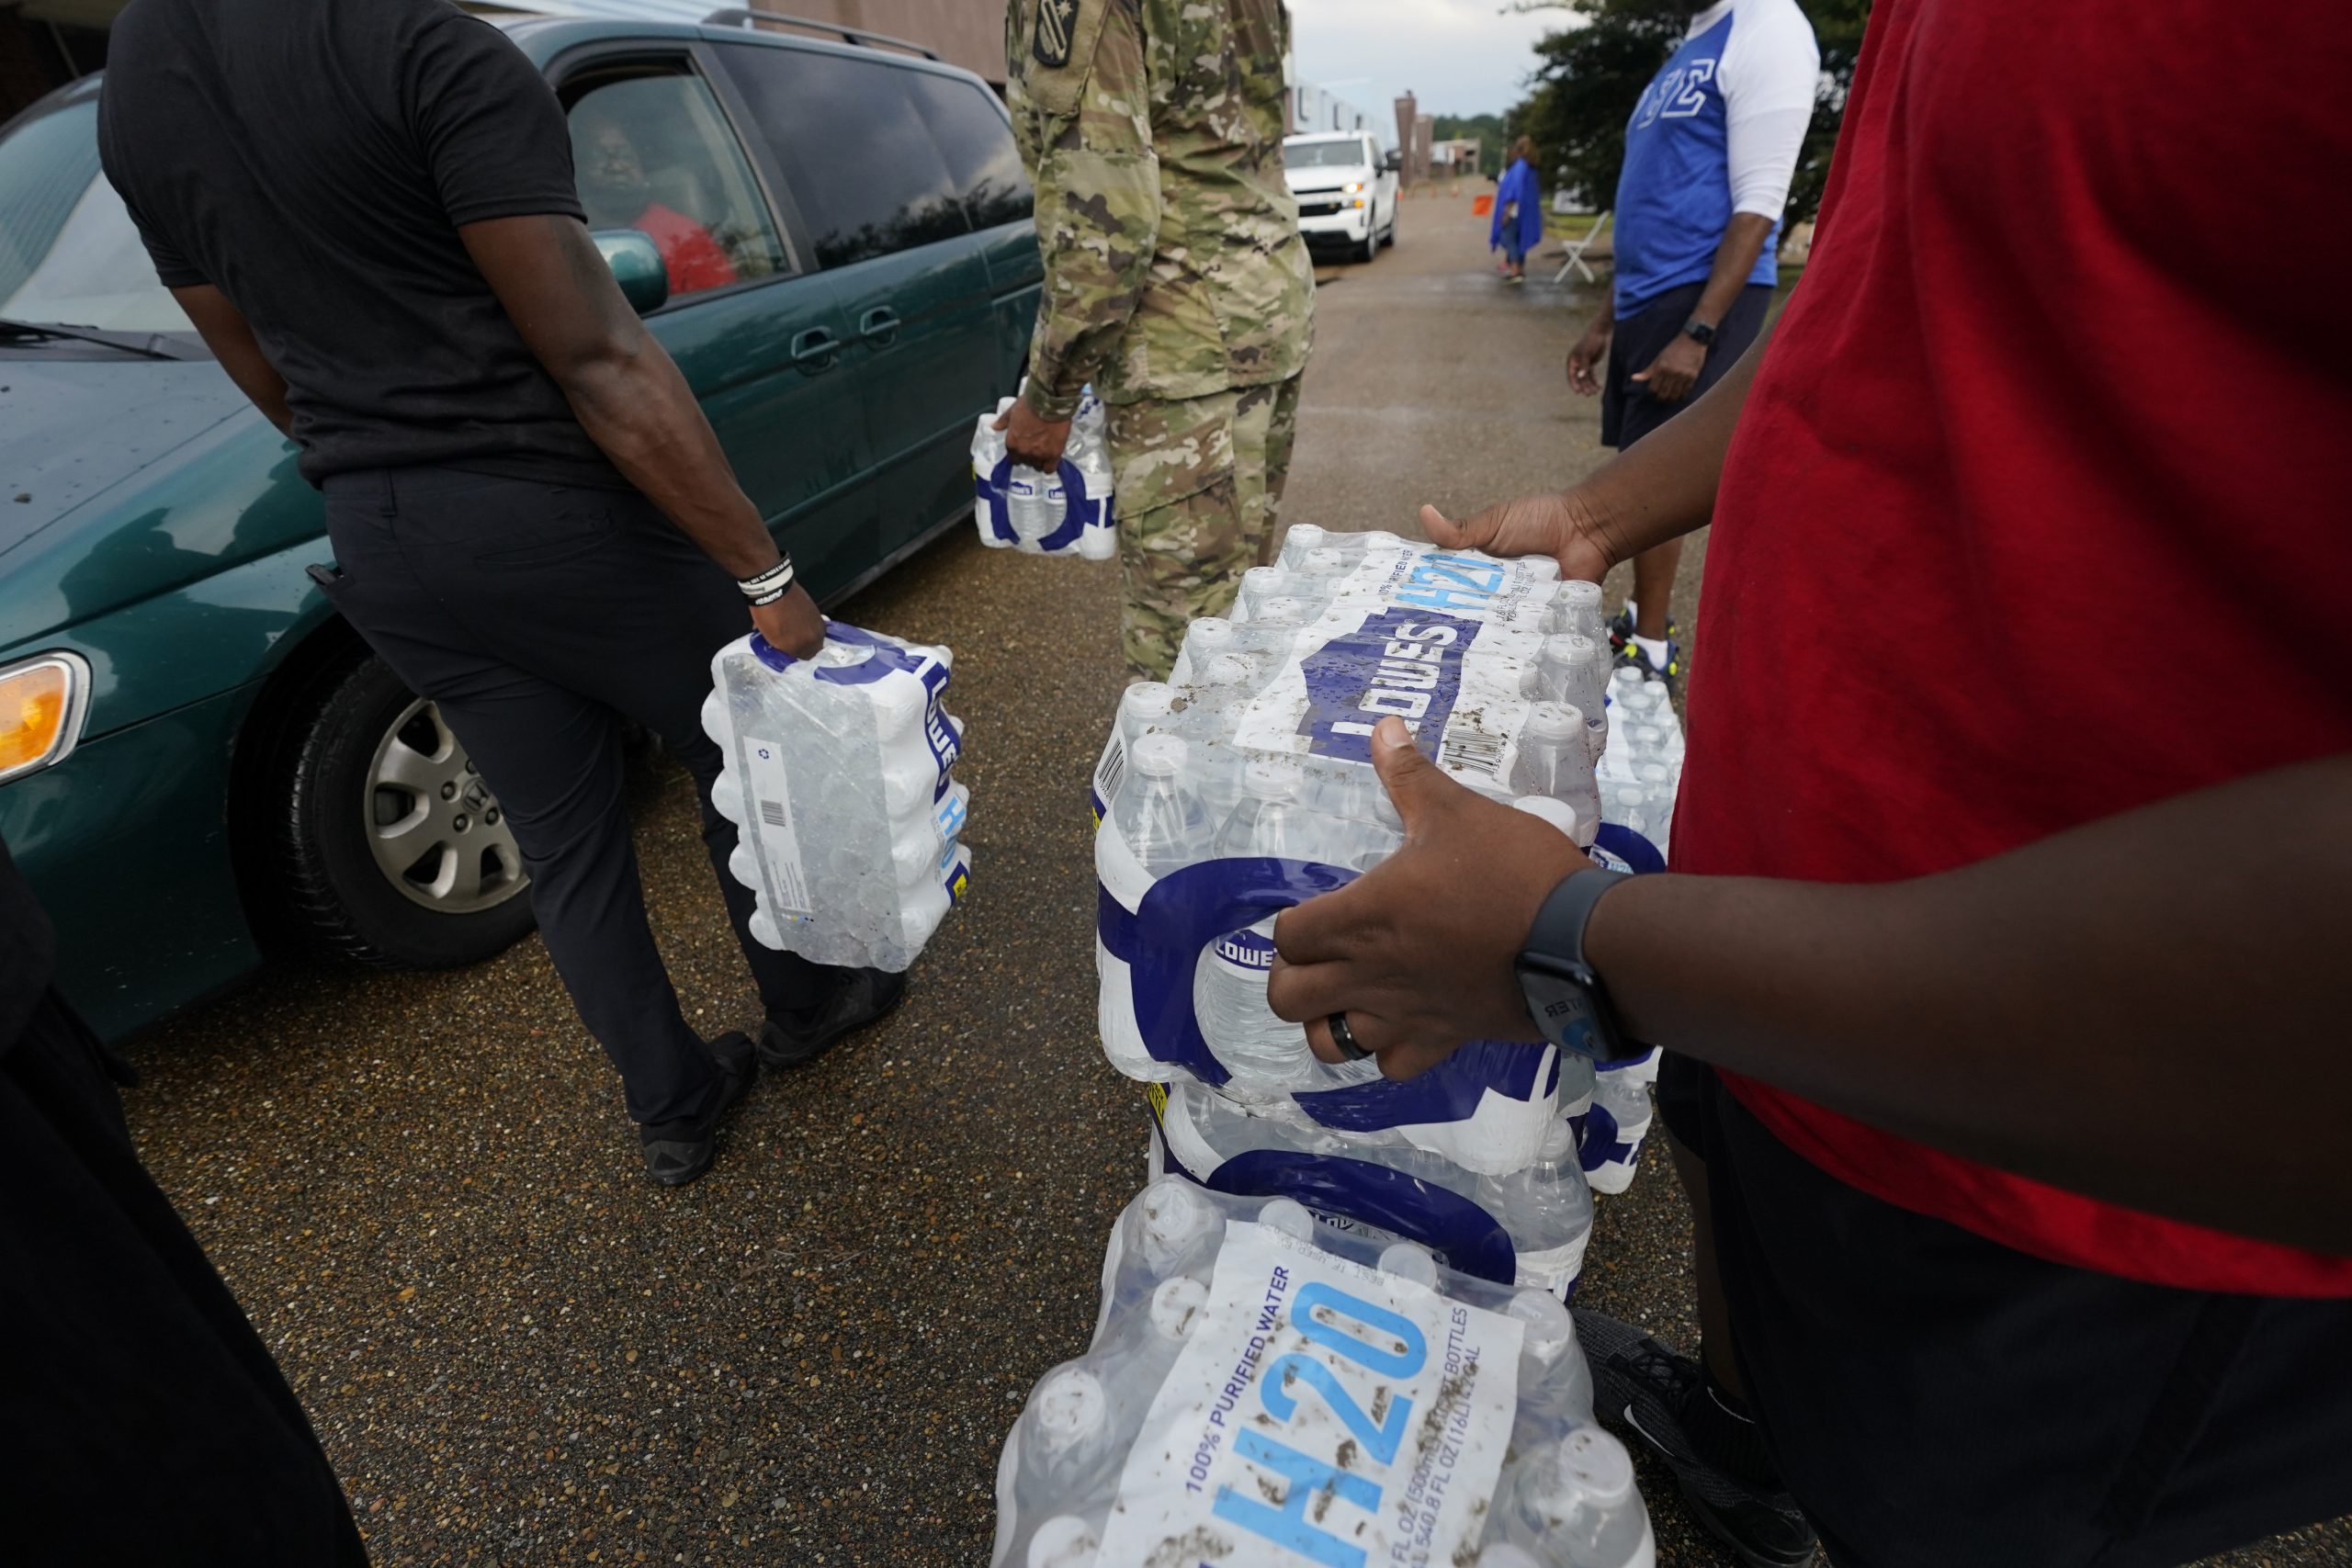 House appropriators eye as much as $200M for Jackson water crisis